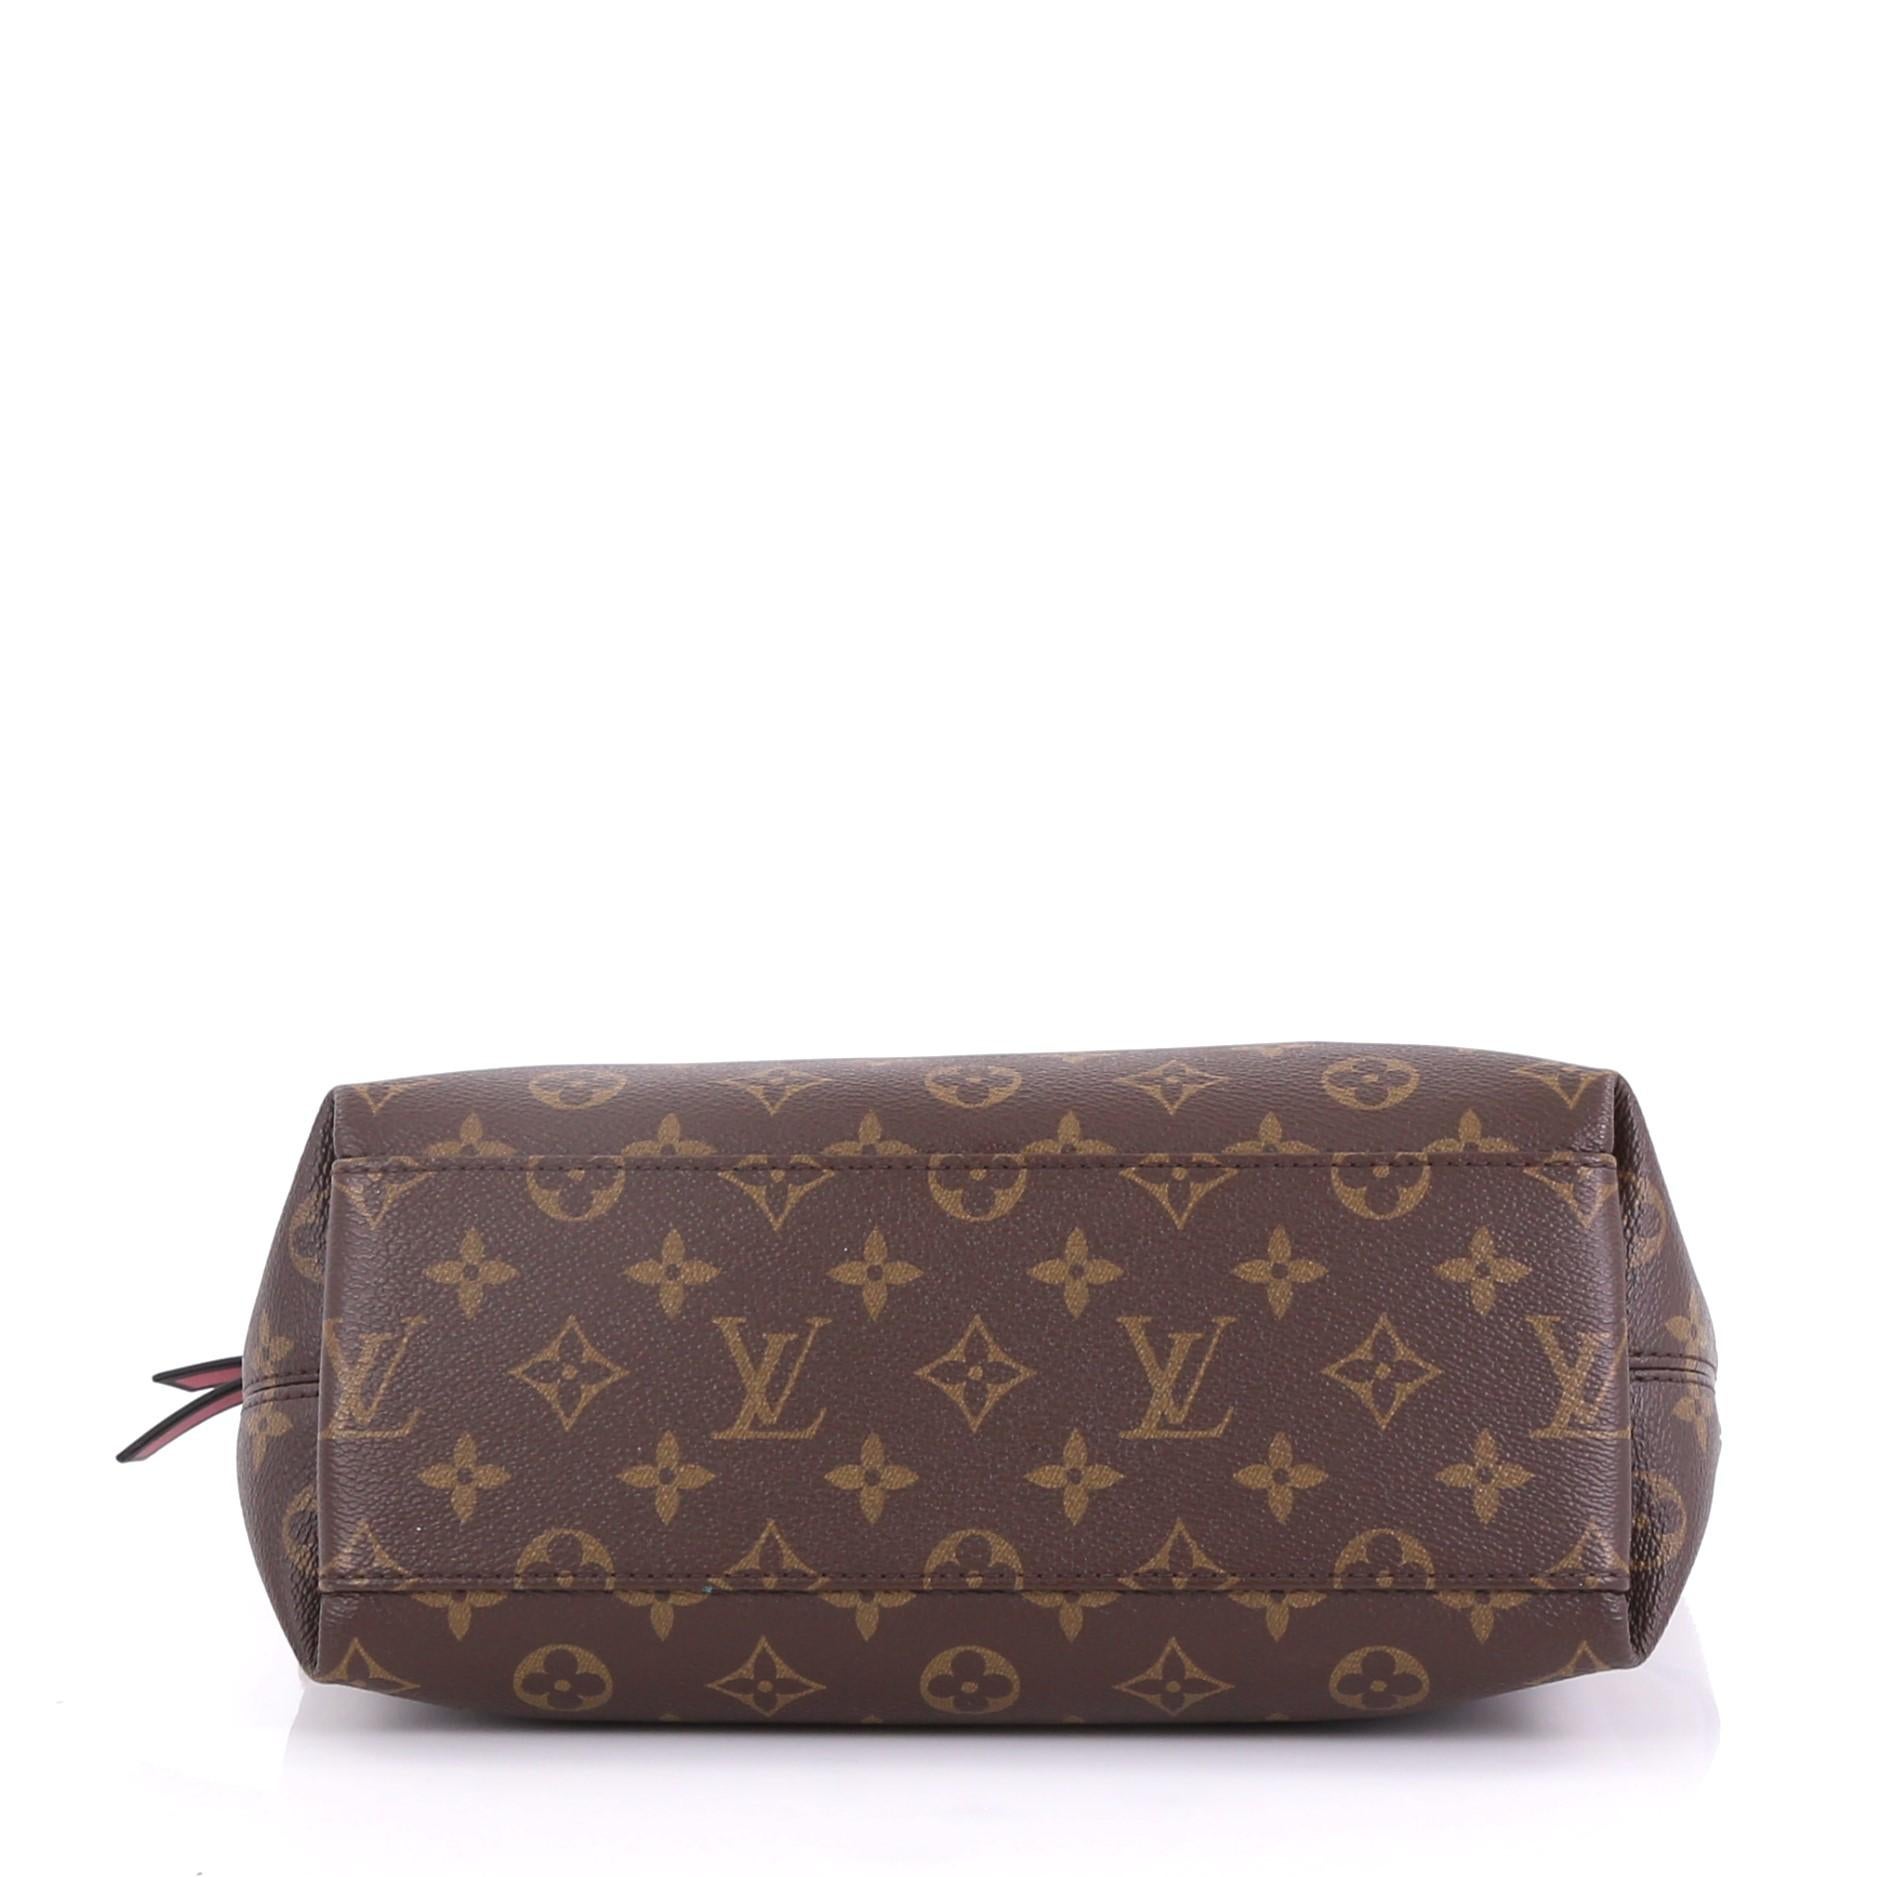 Women's Louis Vuitton Tuileries Besace Bag Monogram Canvas with Leather